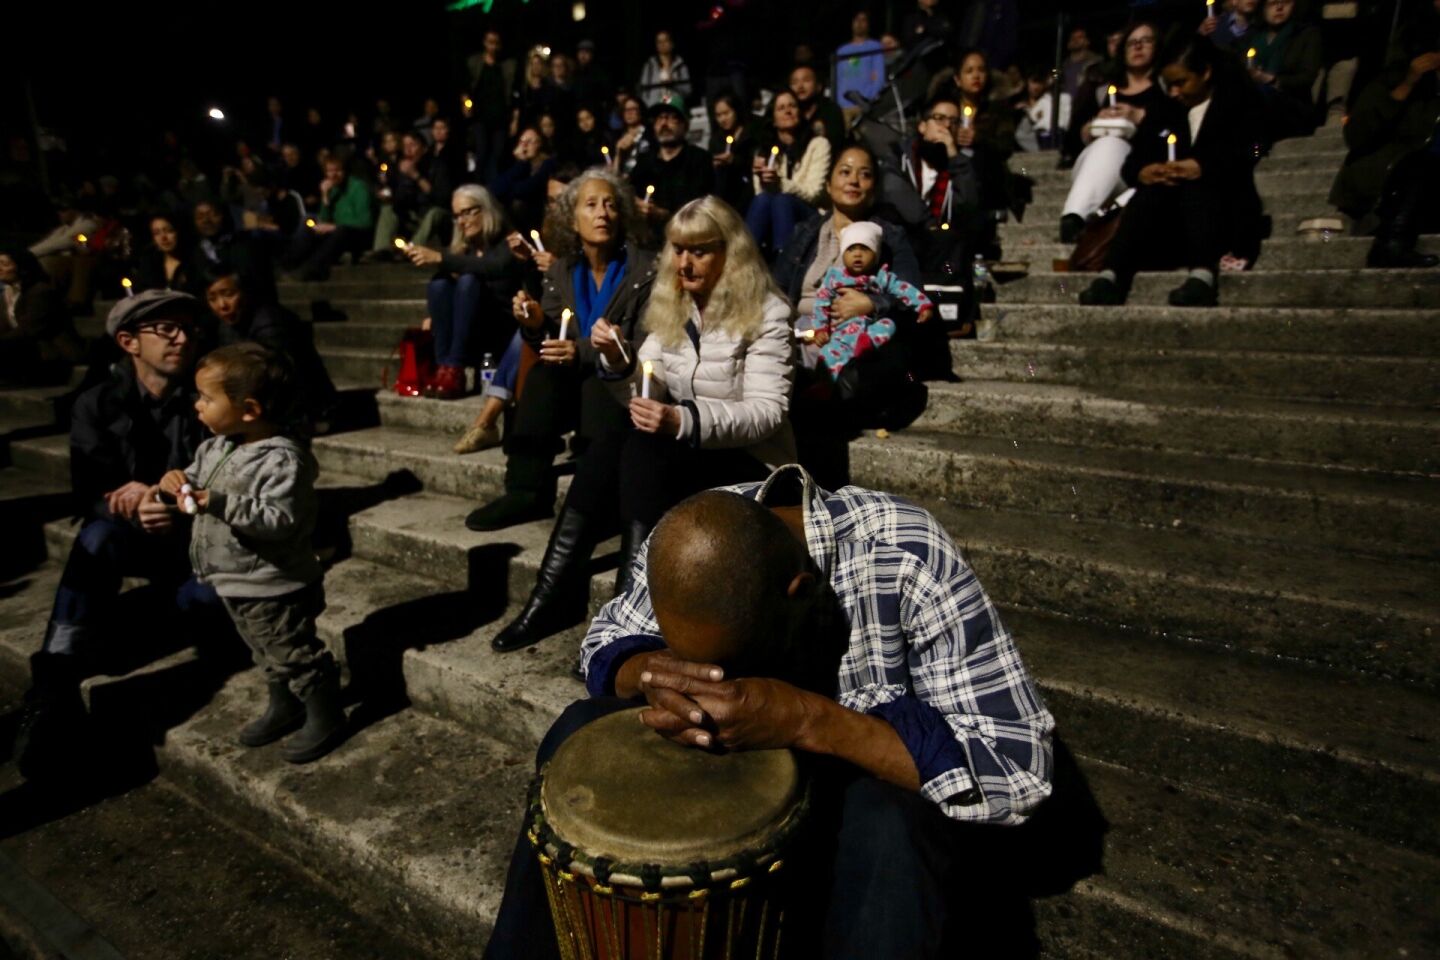 Mourners observe a moment of silence for the lives lost in the Ghost Ship warehouse fire at the Oakland Museum of California on Friday evening.